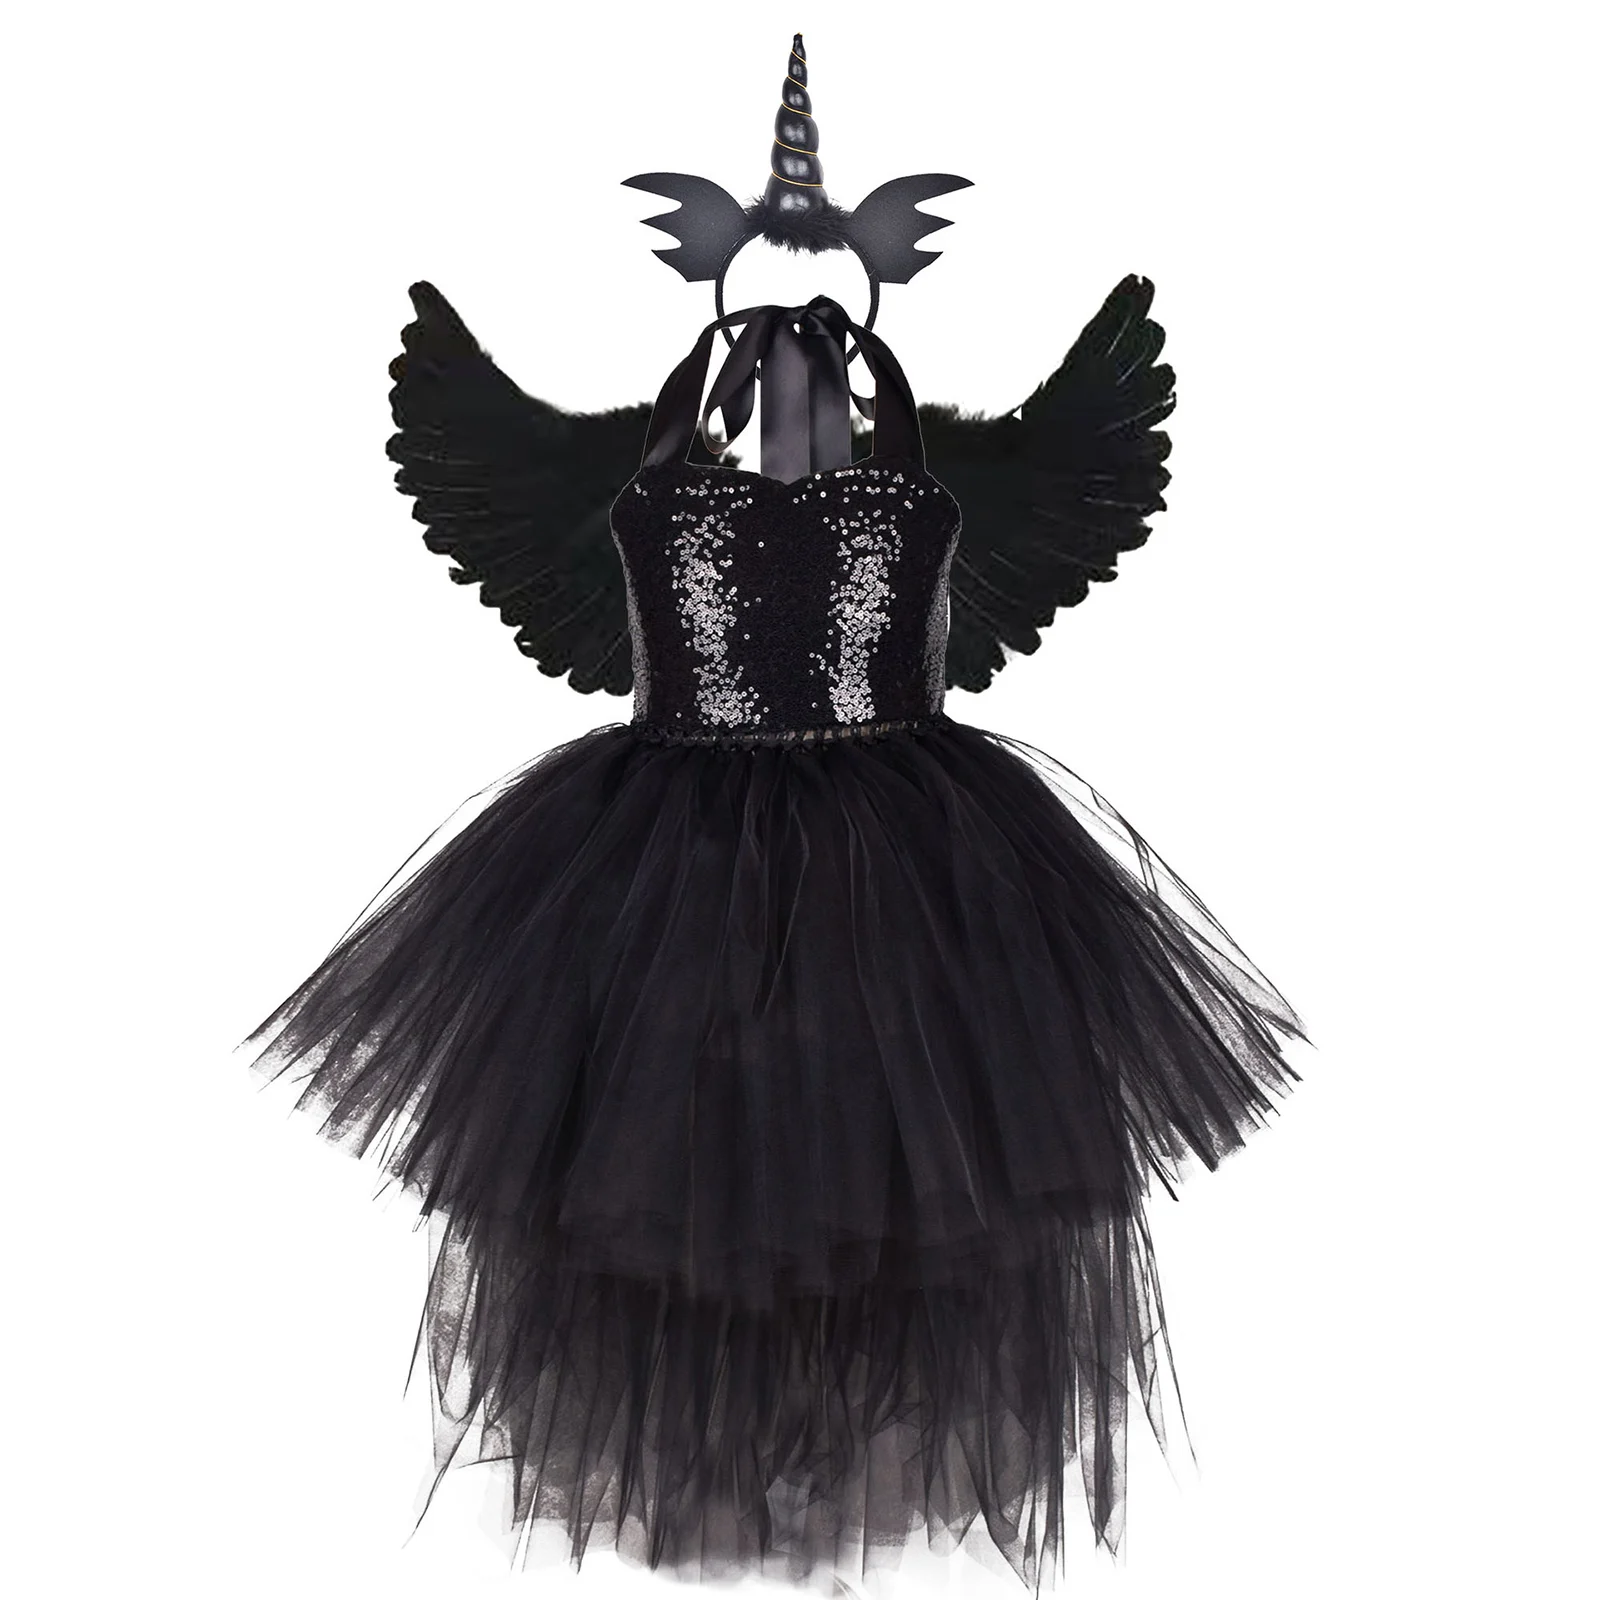 

Kids Girls Sequins Tulle Tutu Dress With Angel Wings And Headband Set For Halloween Vampire Cosplay Party Performance Dress Up